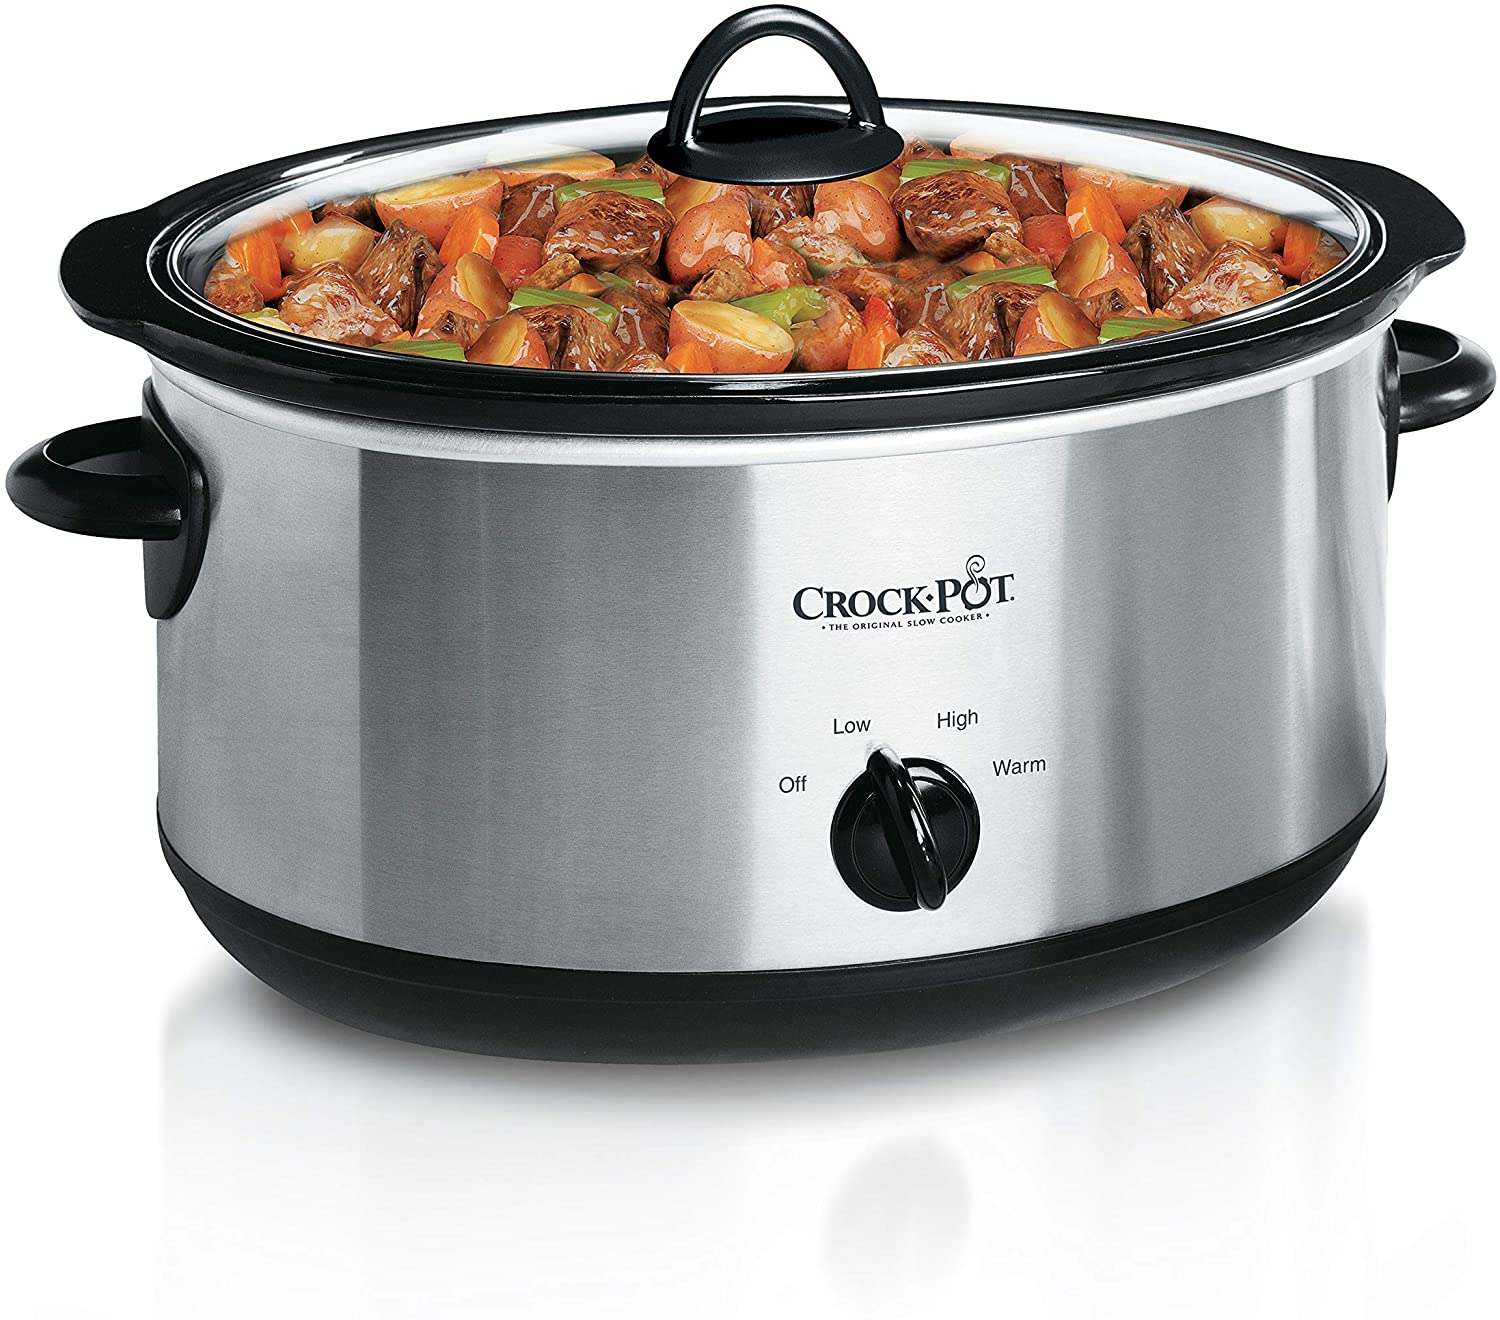 Crock-Pot 7-Quart Stainless Steel Oval Manual Slow Cooker $24.99 @Amazon